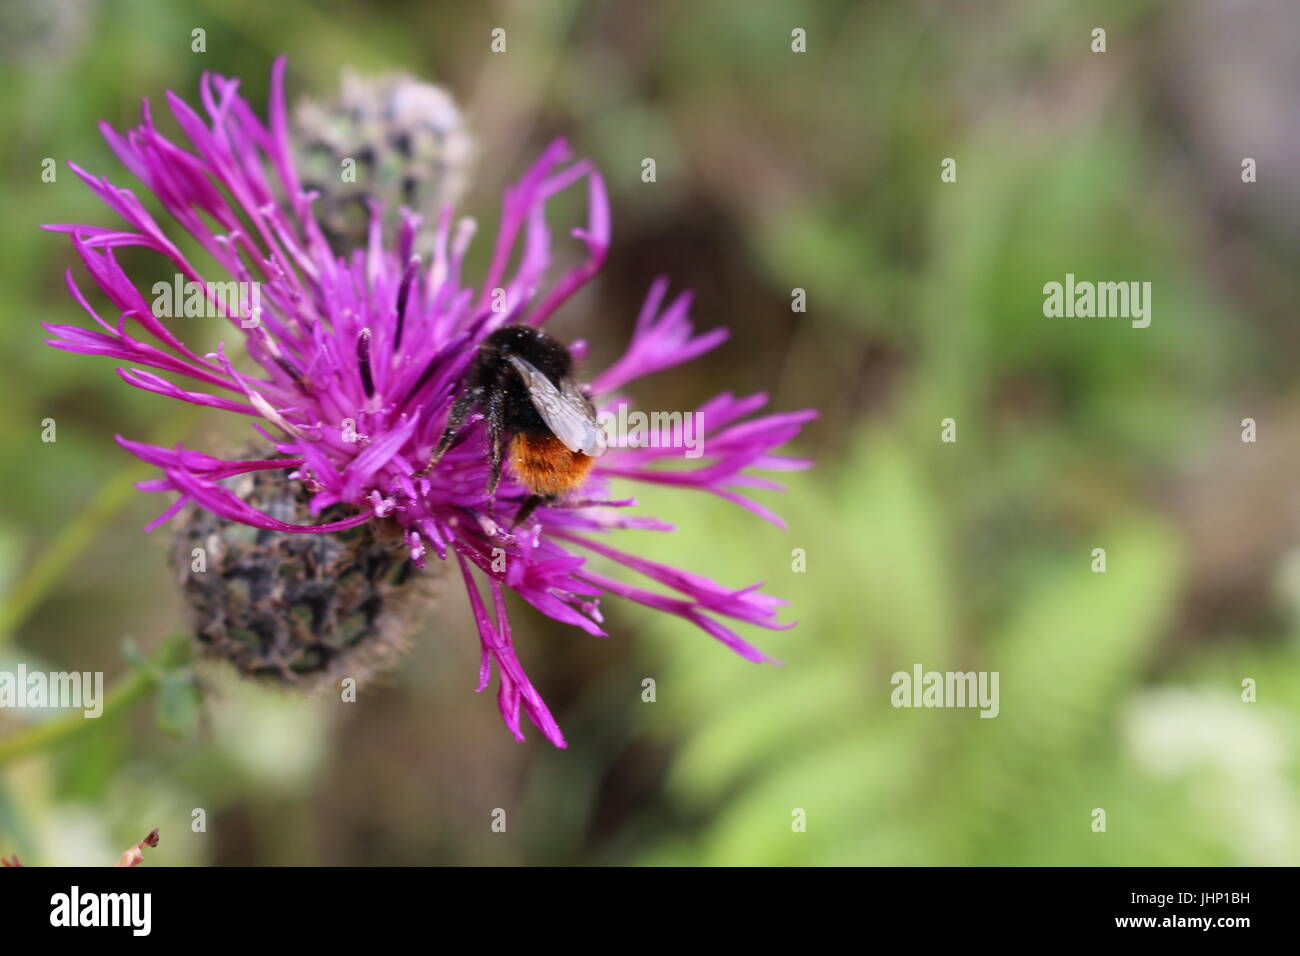 Red tailed bumblebee on flower Stock Photo